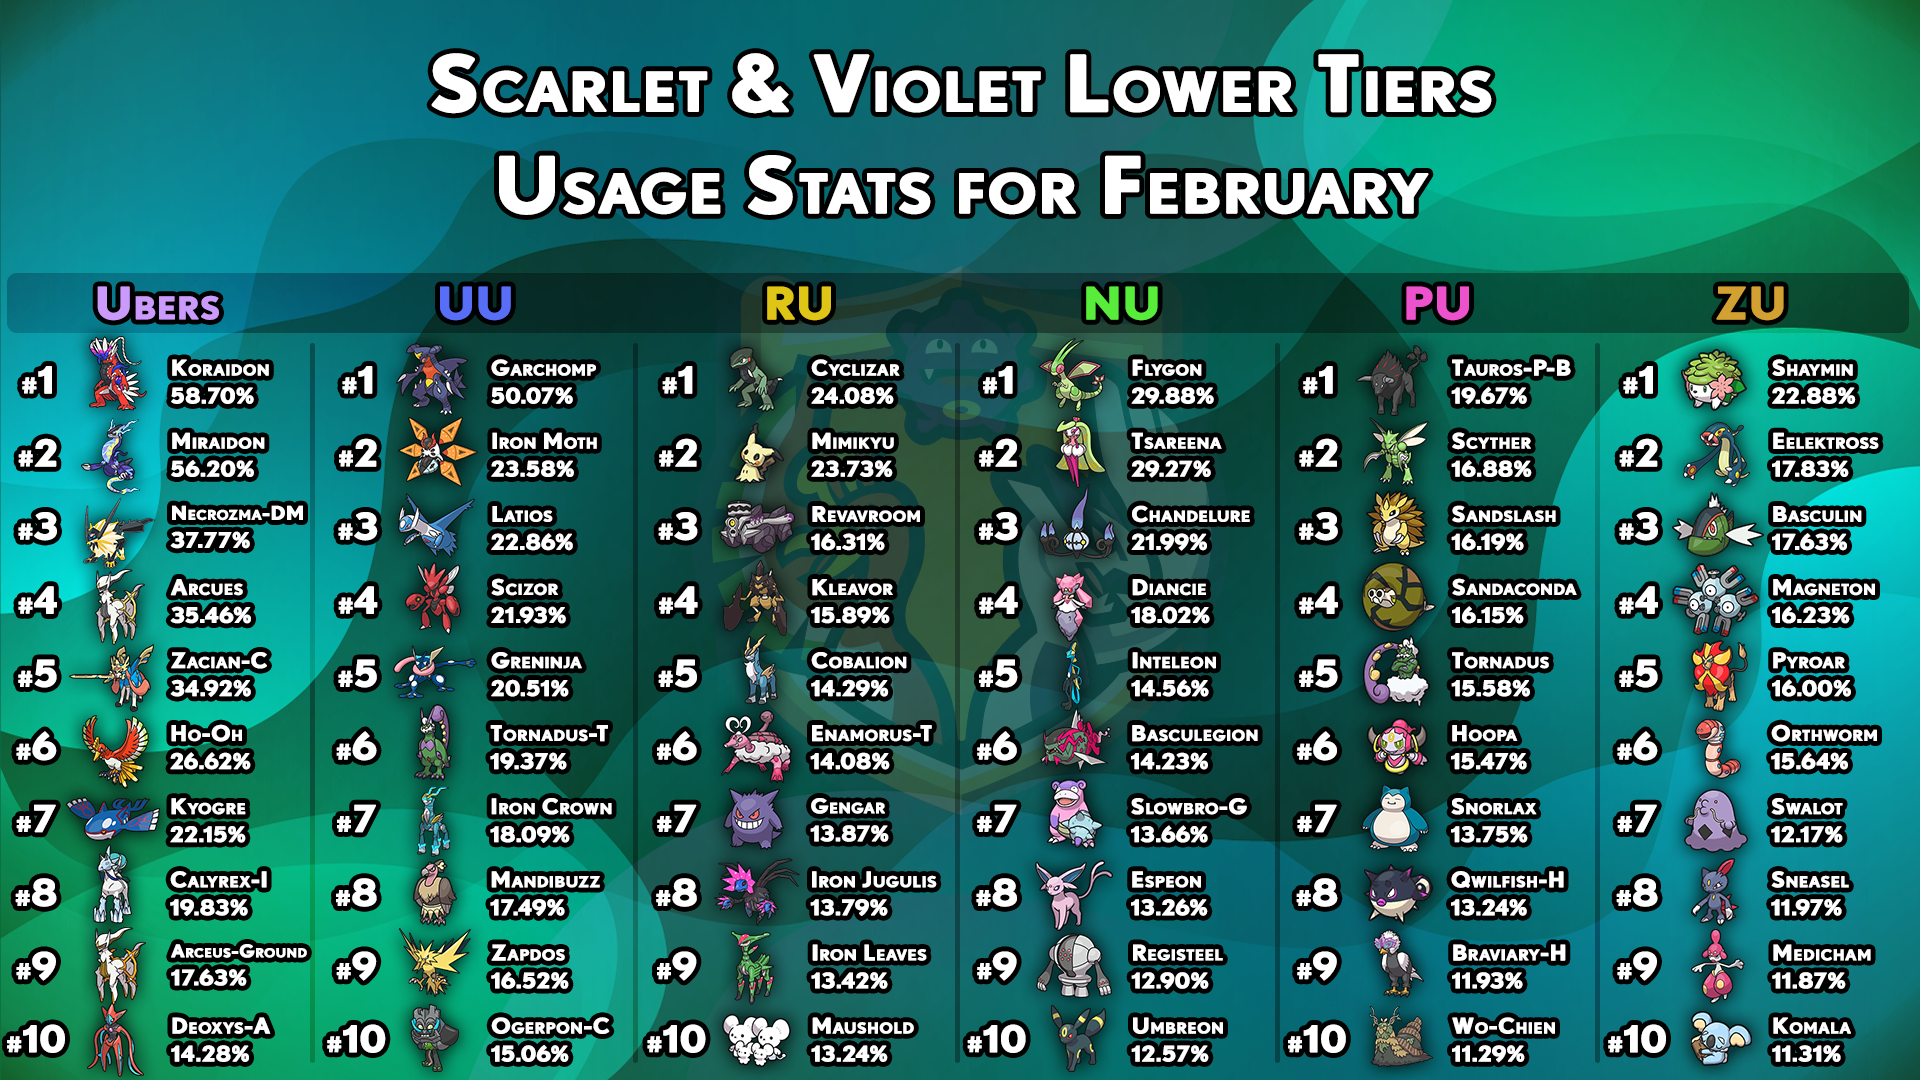 usagestats-gen9-other-tiers-february.png